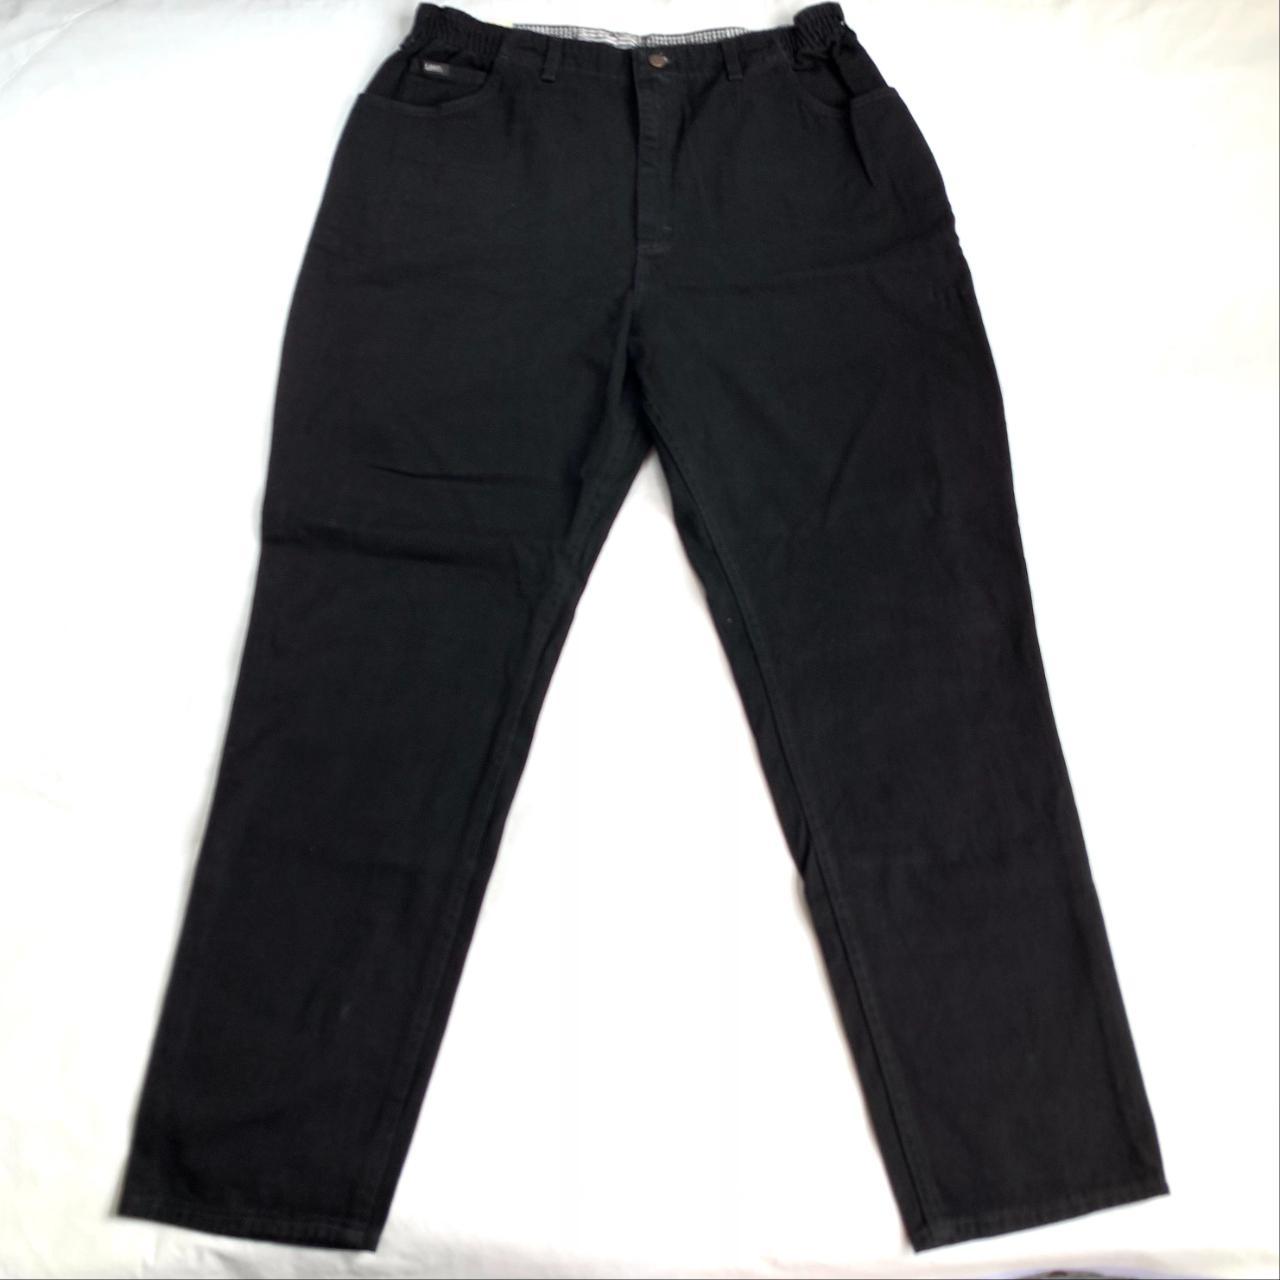 Product Image 1 - Vintage deadstock 90s Lee jeans,